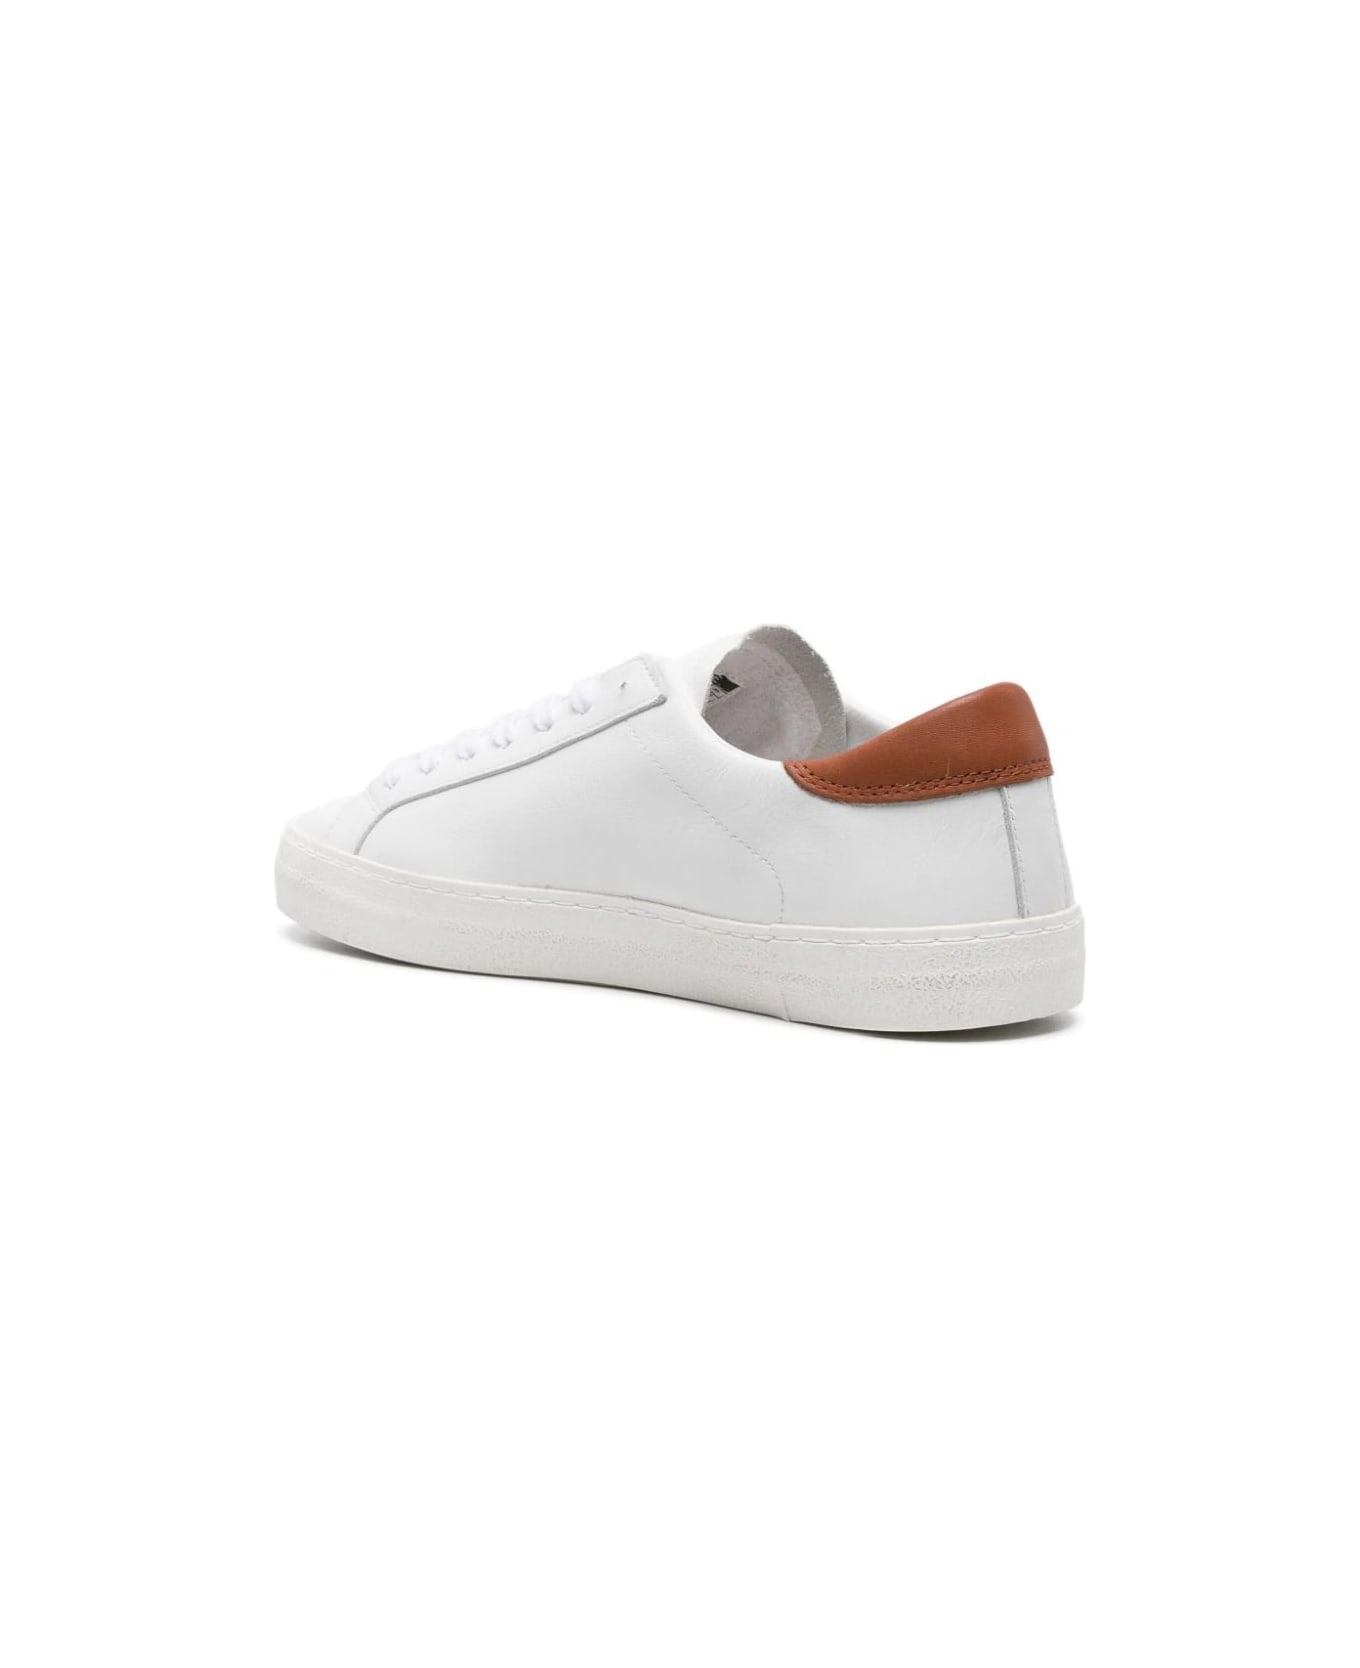 D.A.T.E. White And Brown Hill Sneakers - White スニーカー